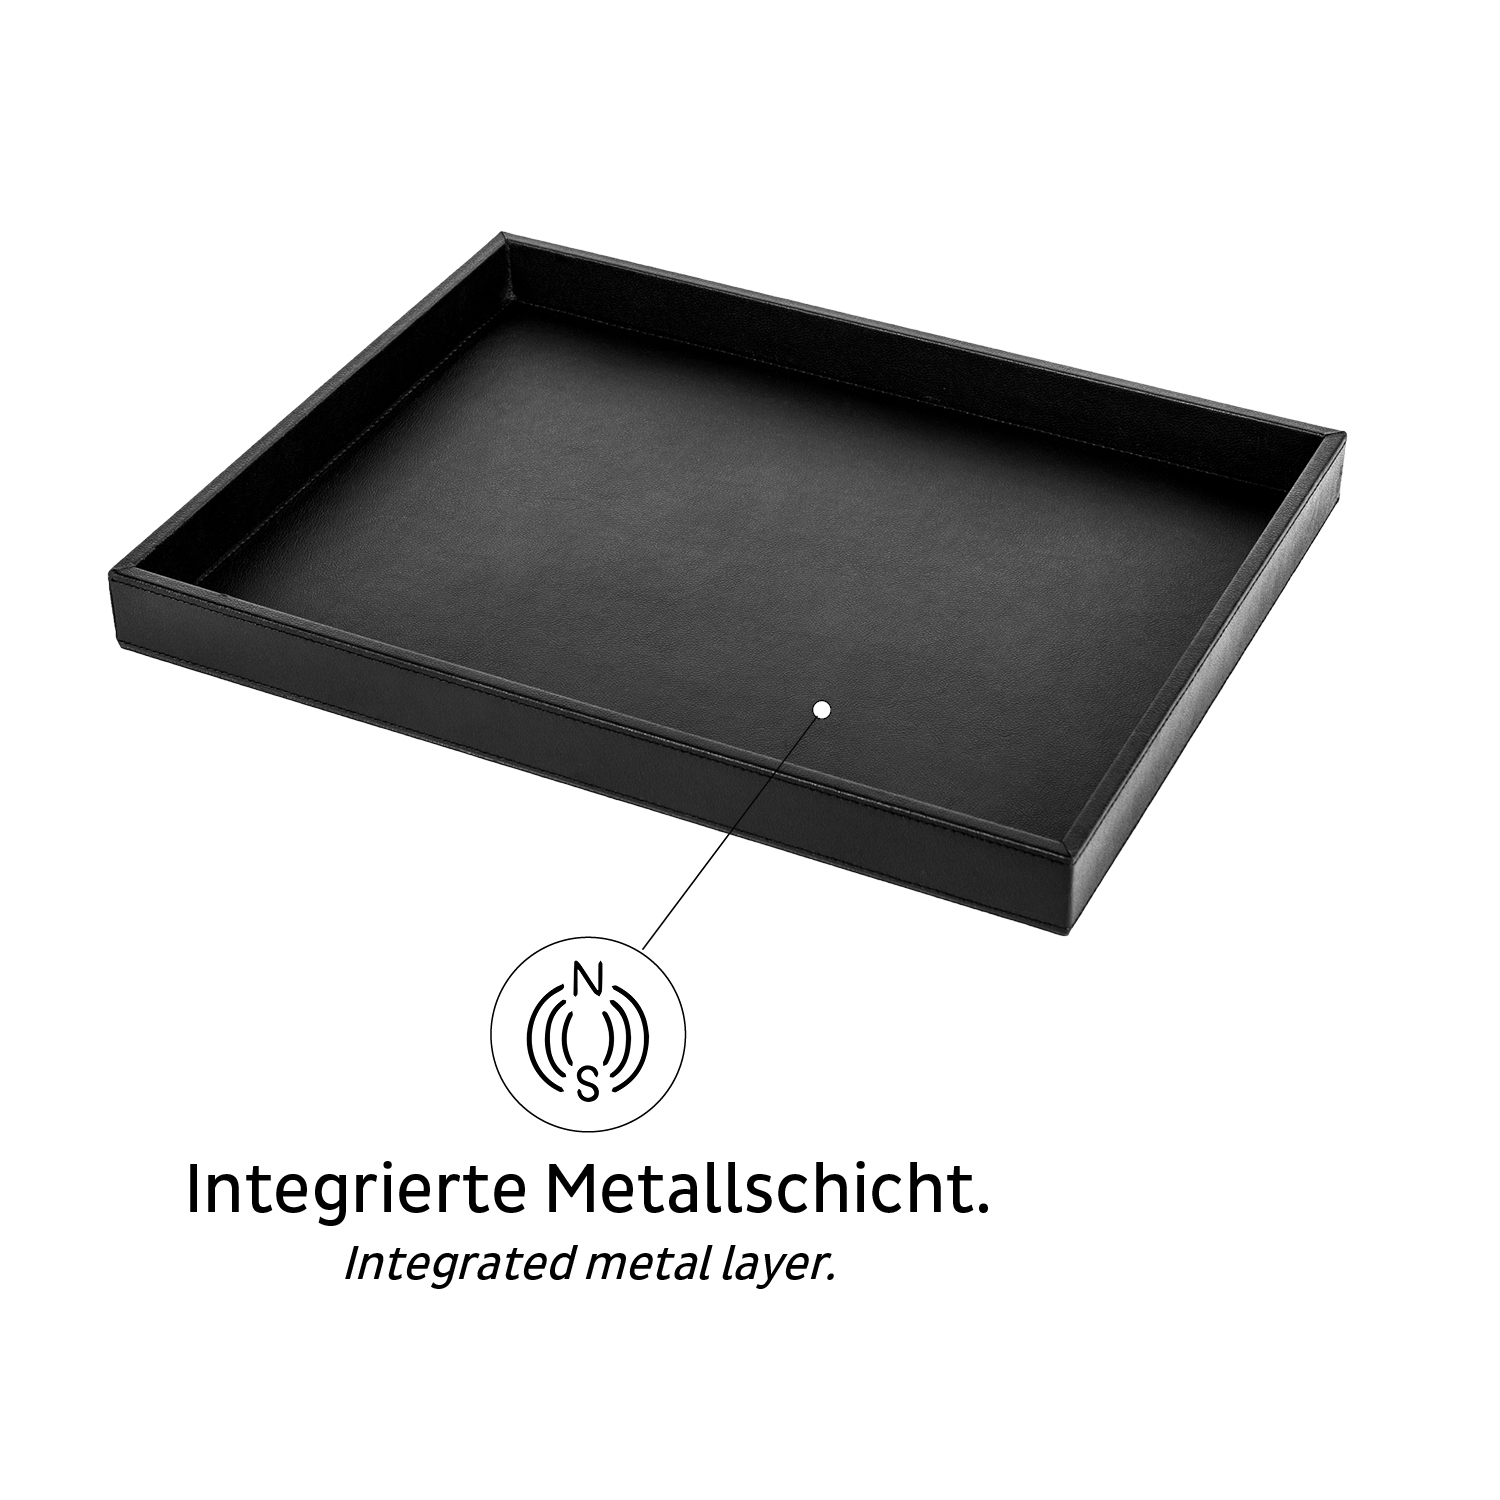 Metall-Nano-Matte für cleveres Magnetglas-System - Made in Germany | silwy